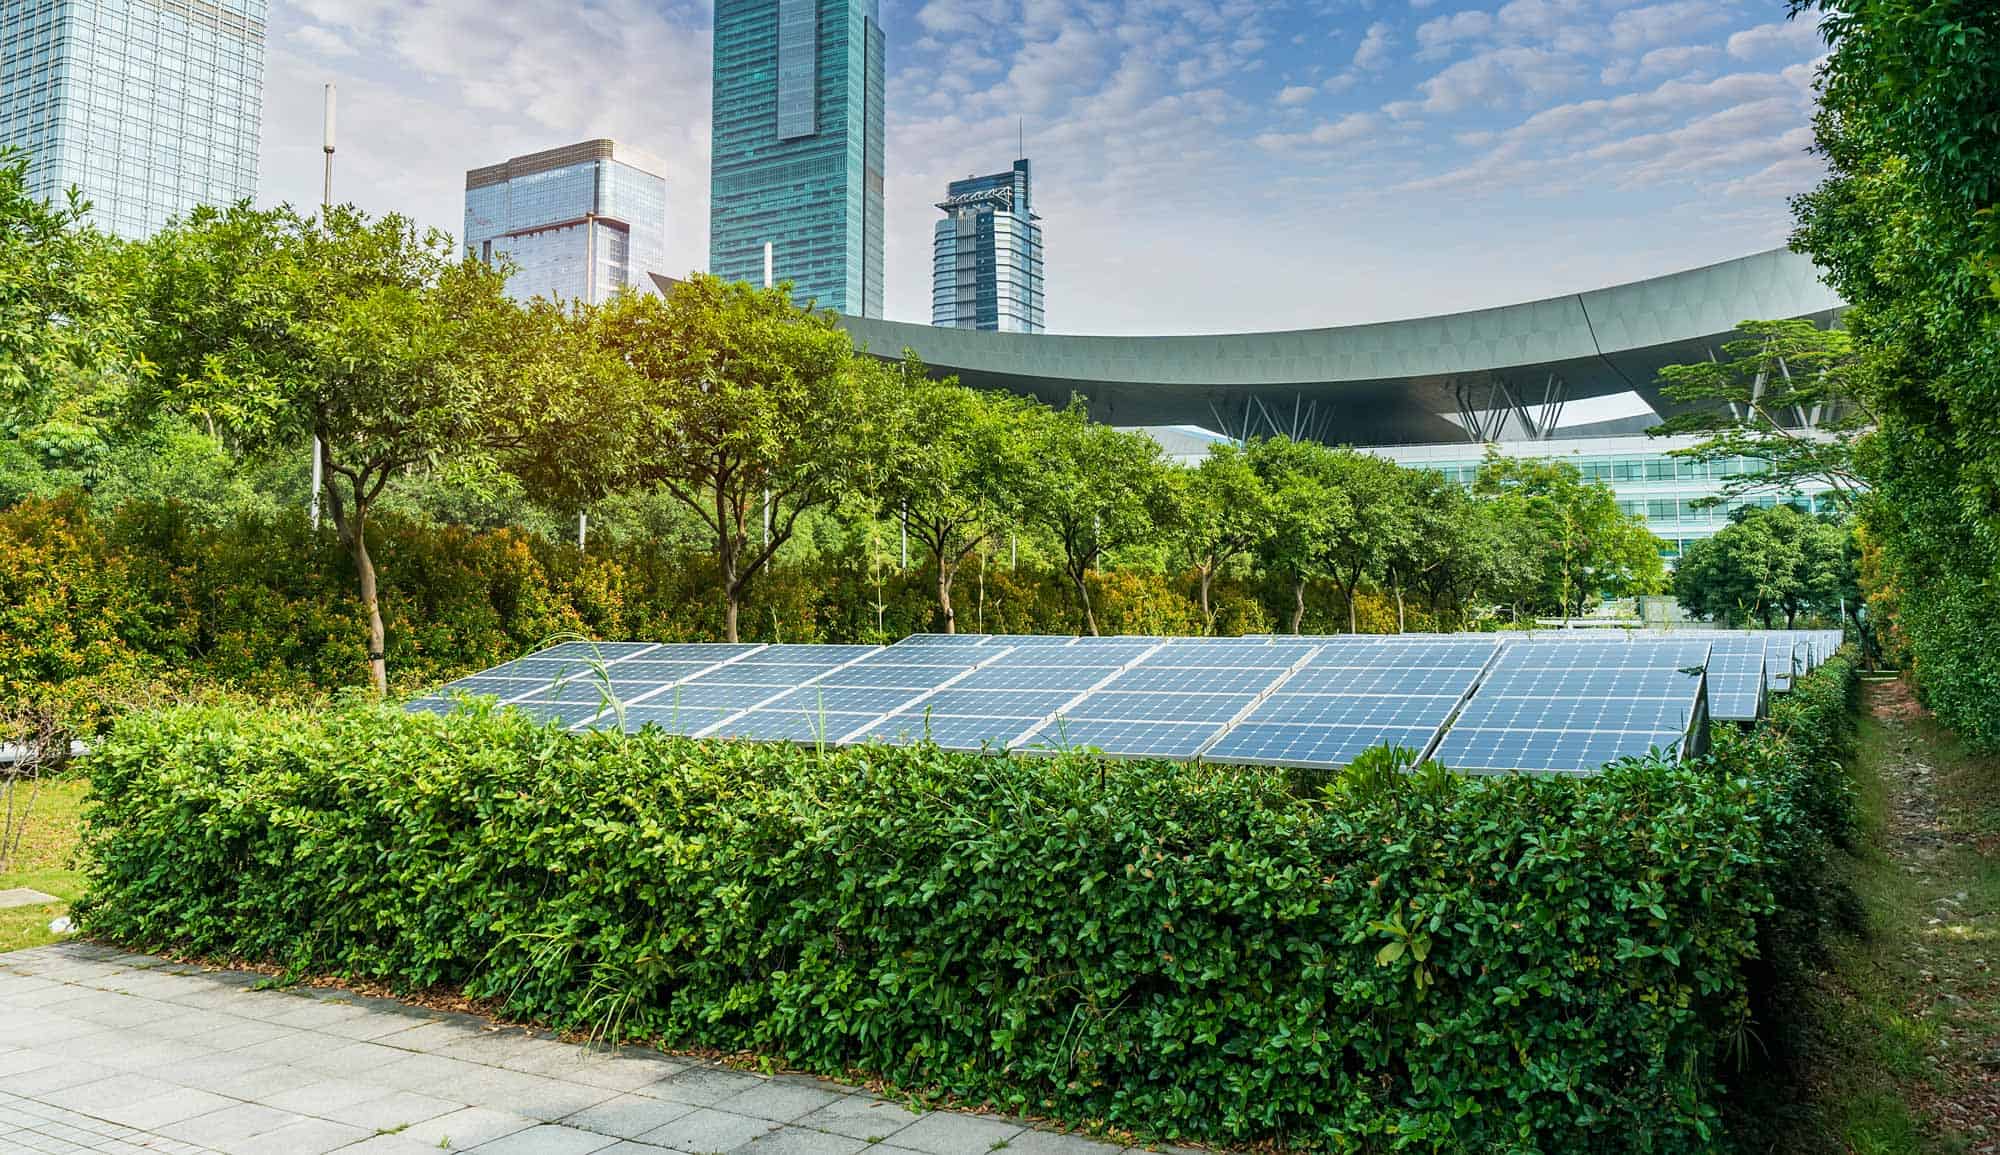 Solar panels in an urban park with modern buildings in the background.